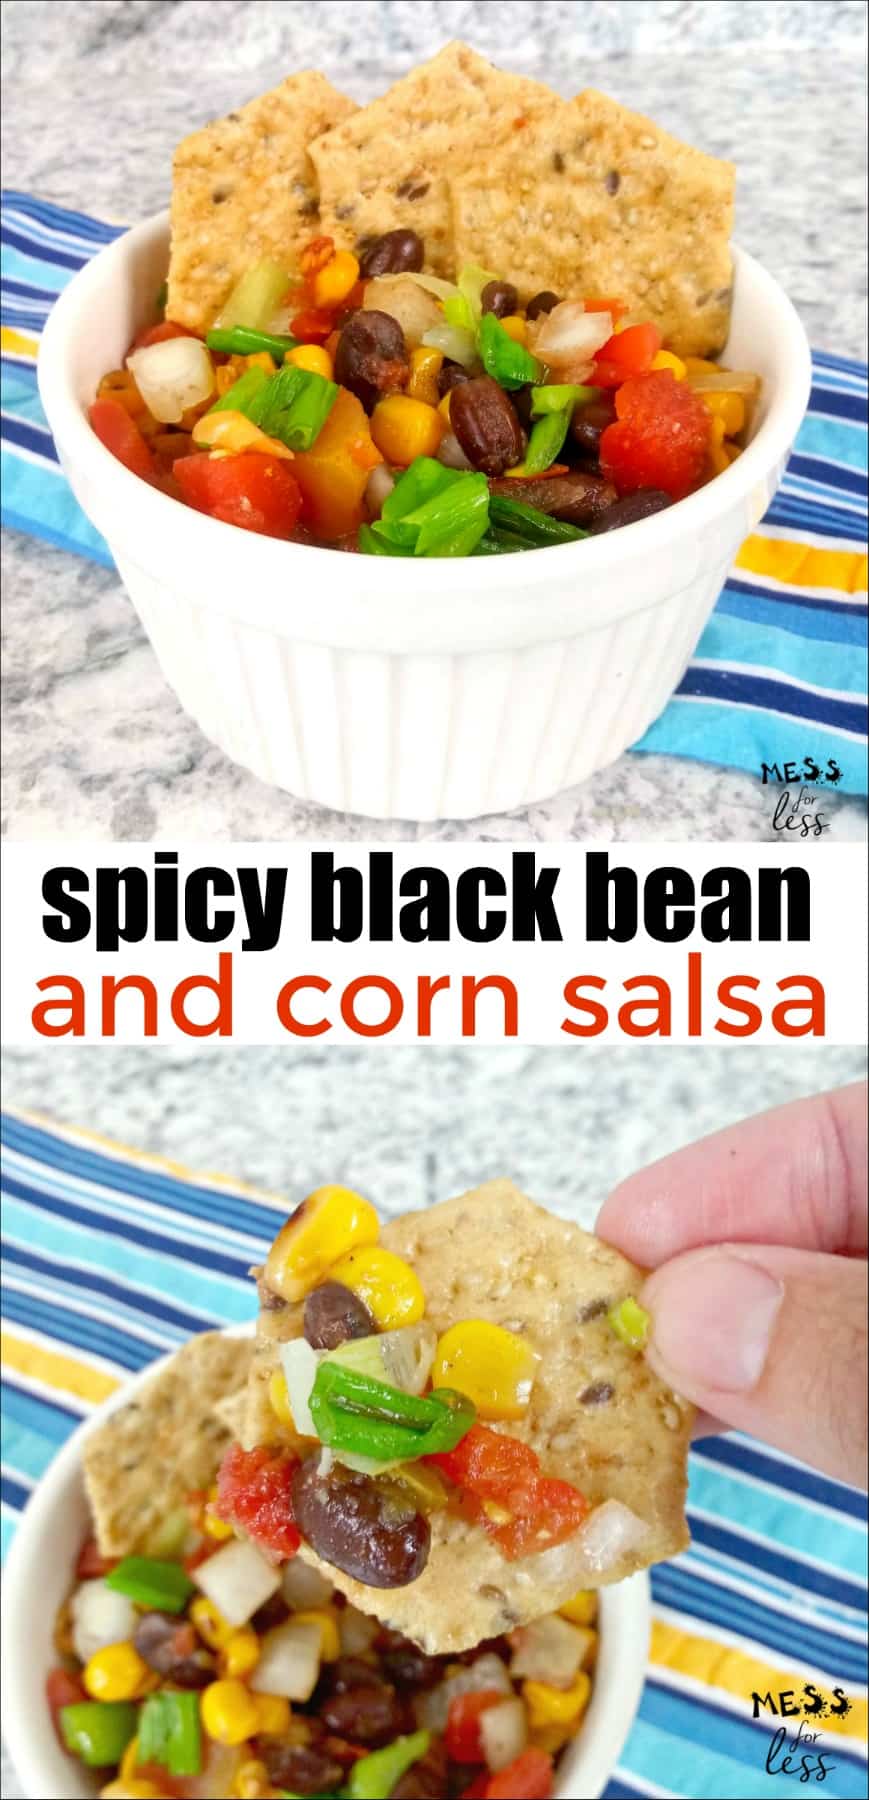 This Spicy Black Bean and Corn Salsa is perfect to make for summer entertaining. It is an easy recipe to put together and the flavors work perfectly with some crisp tortilla chips.